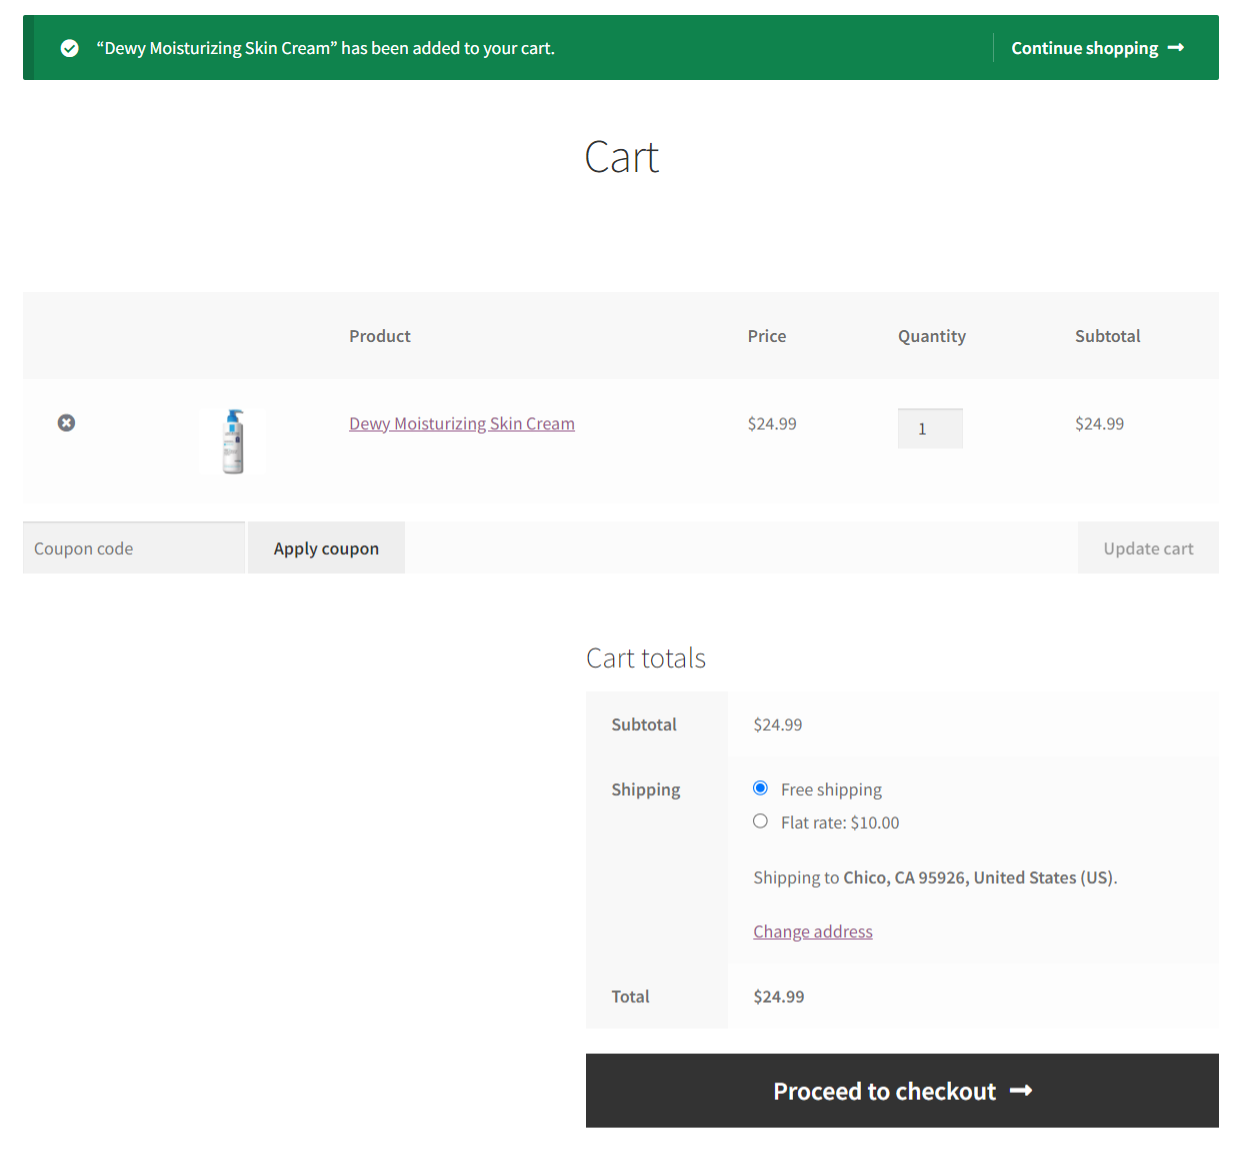 Default WooCommerce cart page to update the cart item quantities.